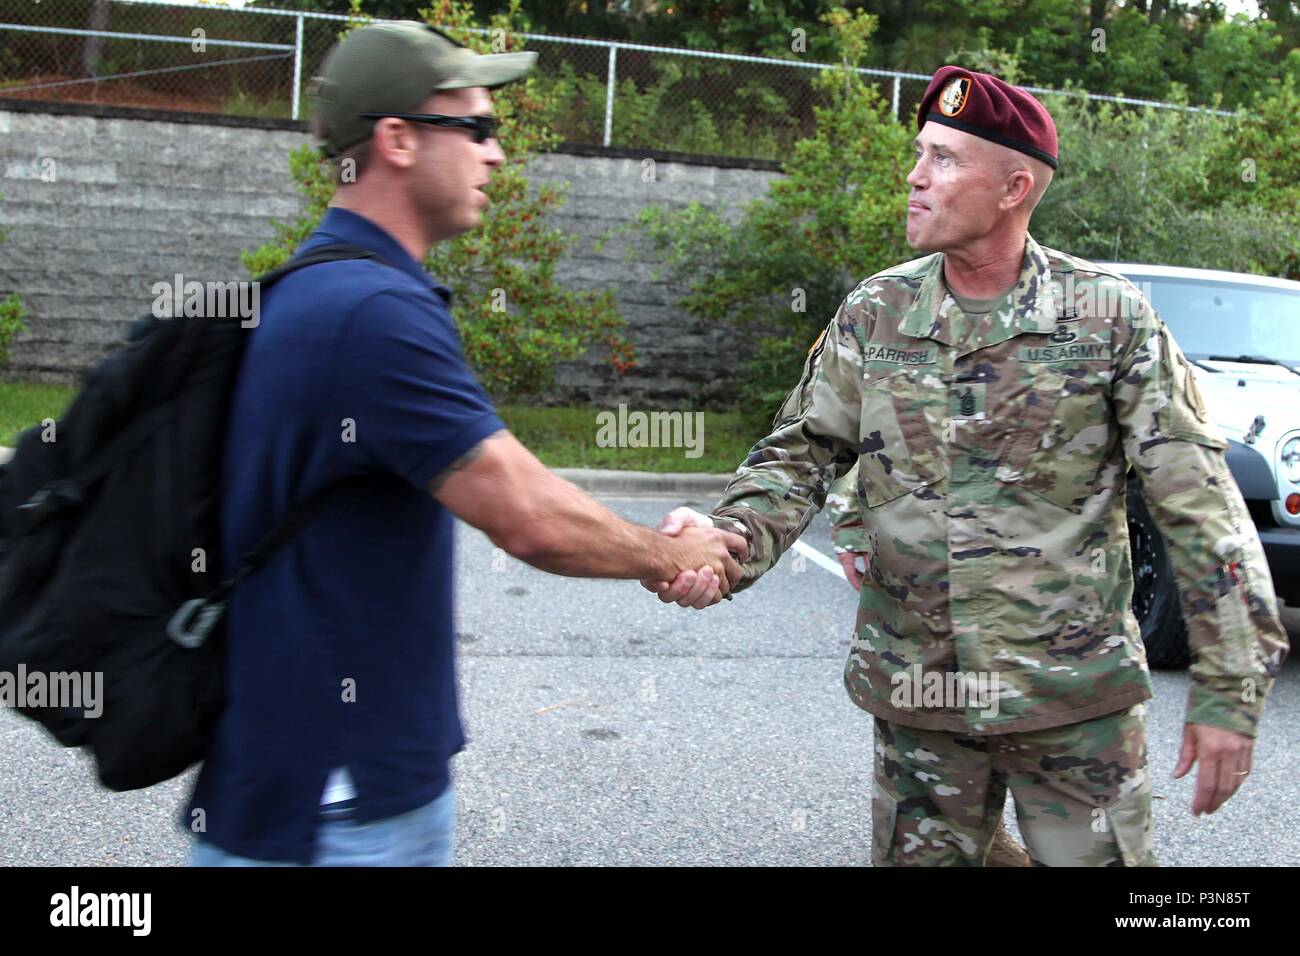 Command Sgt. Major Michael Parrish (right), senior enlisted advisor of 4th Military Information Support Group, shakes hands with a Paratrooper during a redeployment ceremony, July 8. About 60 Soldiers assigned to 4th MISG returned from Qatar following a six-month deployment supporting U.S. Central Command missions in the area. Stock Photo